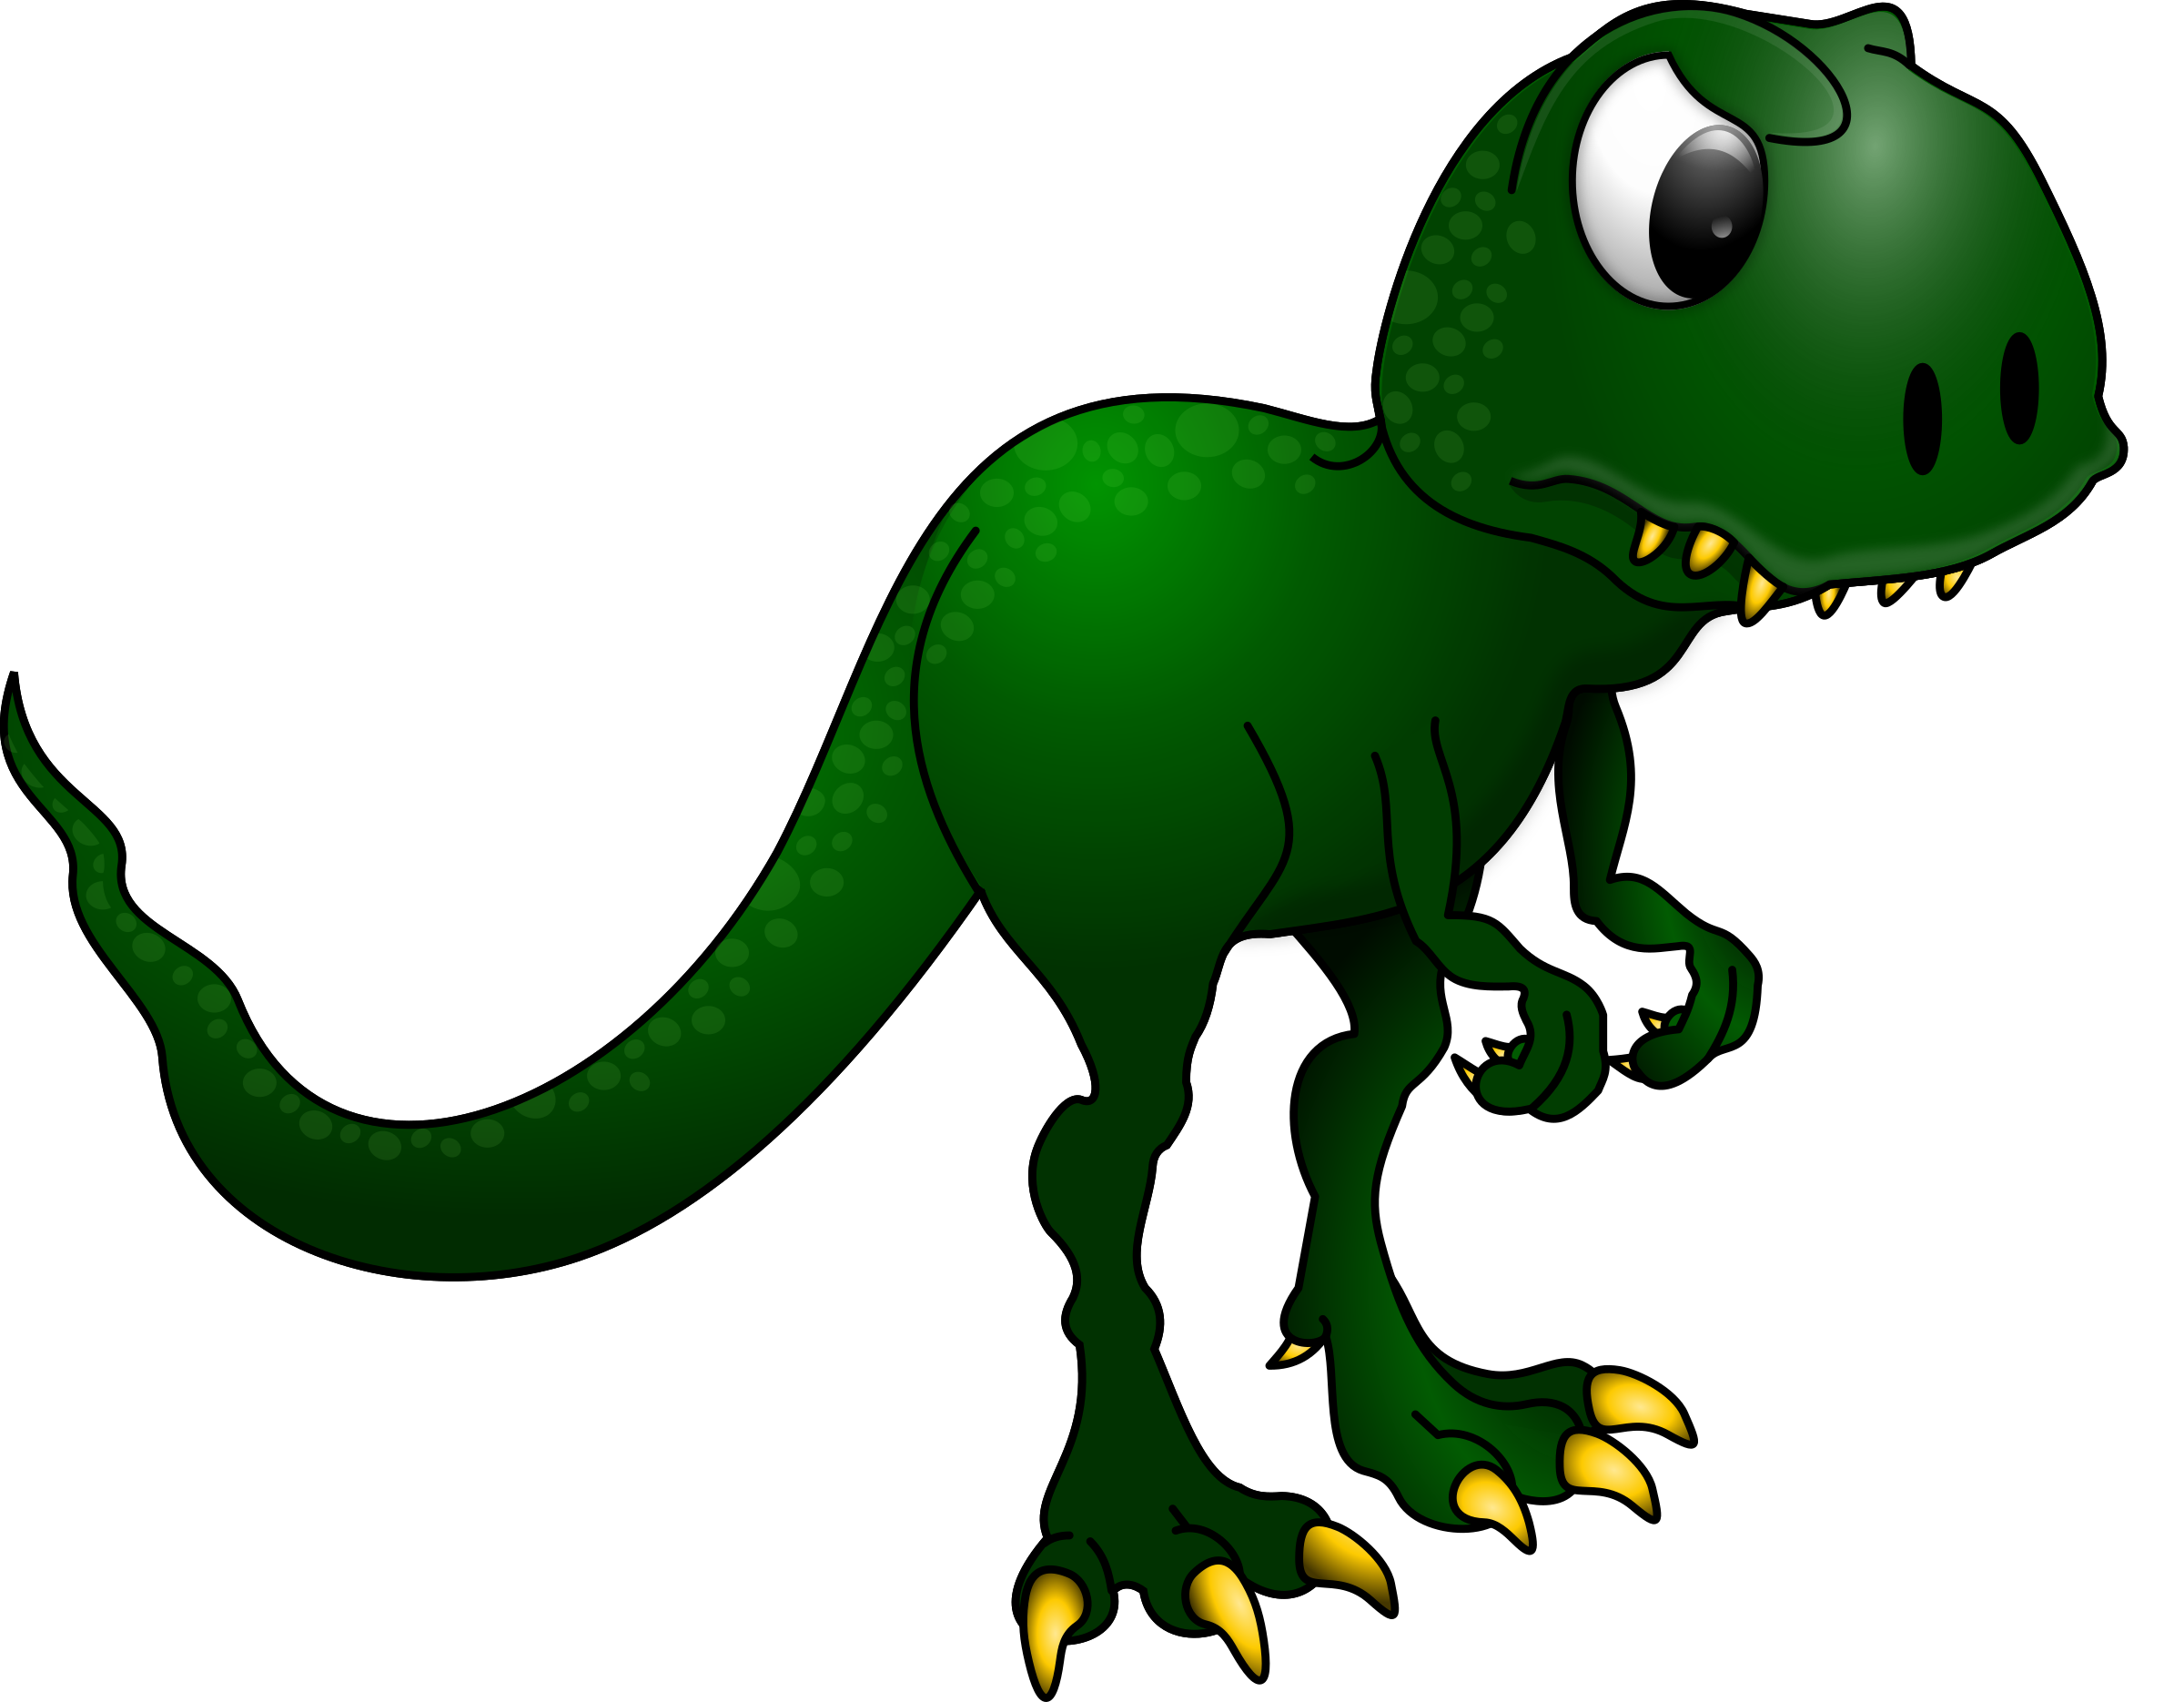 Dinosaurs clipart tail, Dinosaurs tail Transparent FREE for